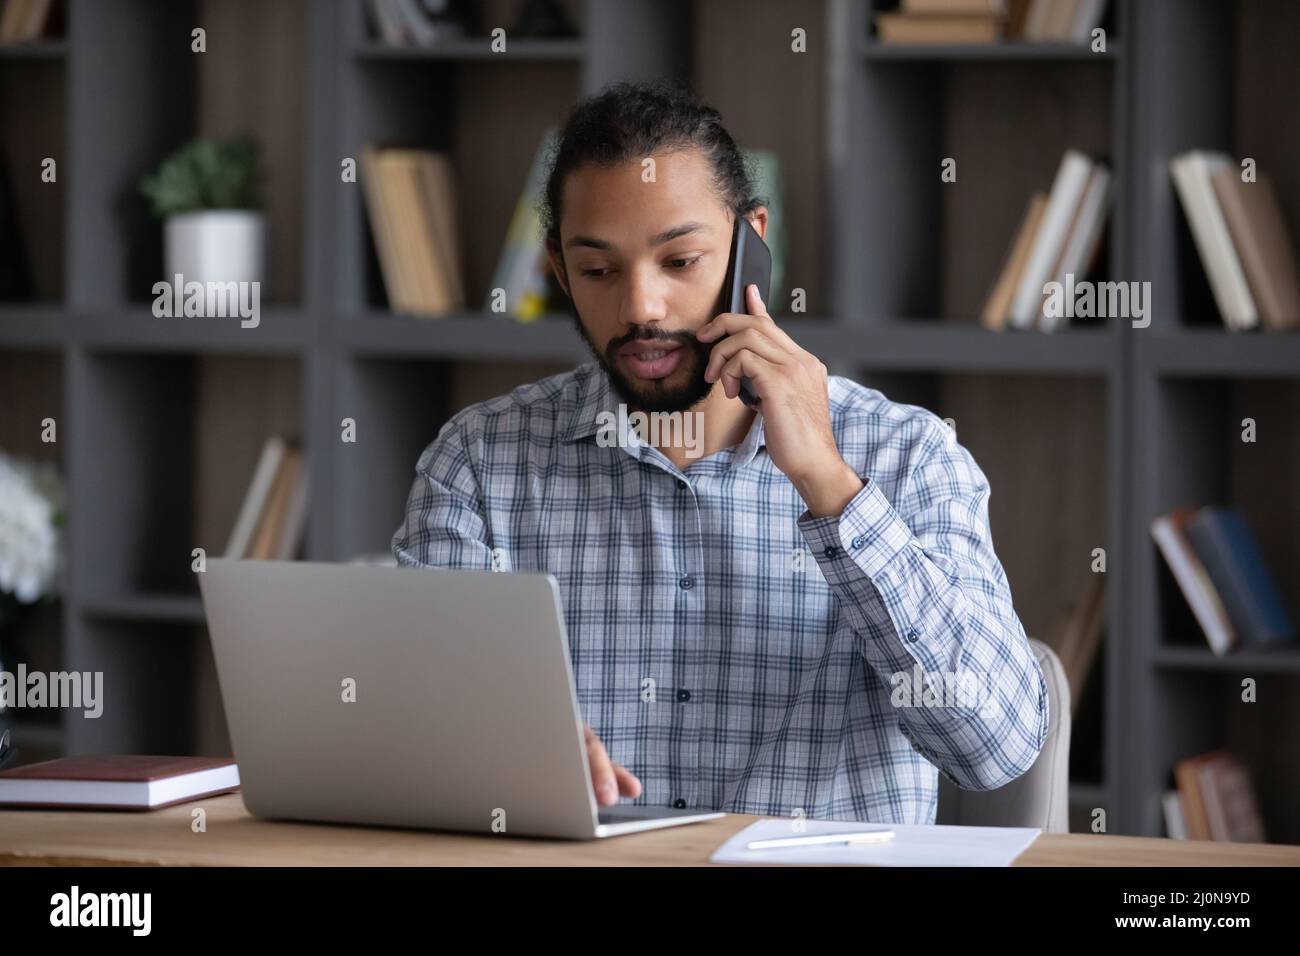 Serious busy African business professional guy working at laptop Stock Photo